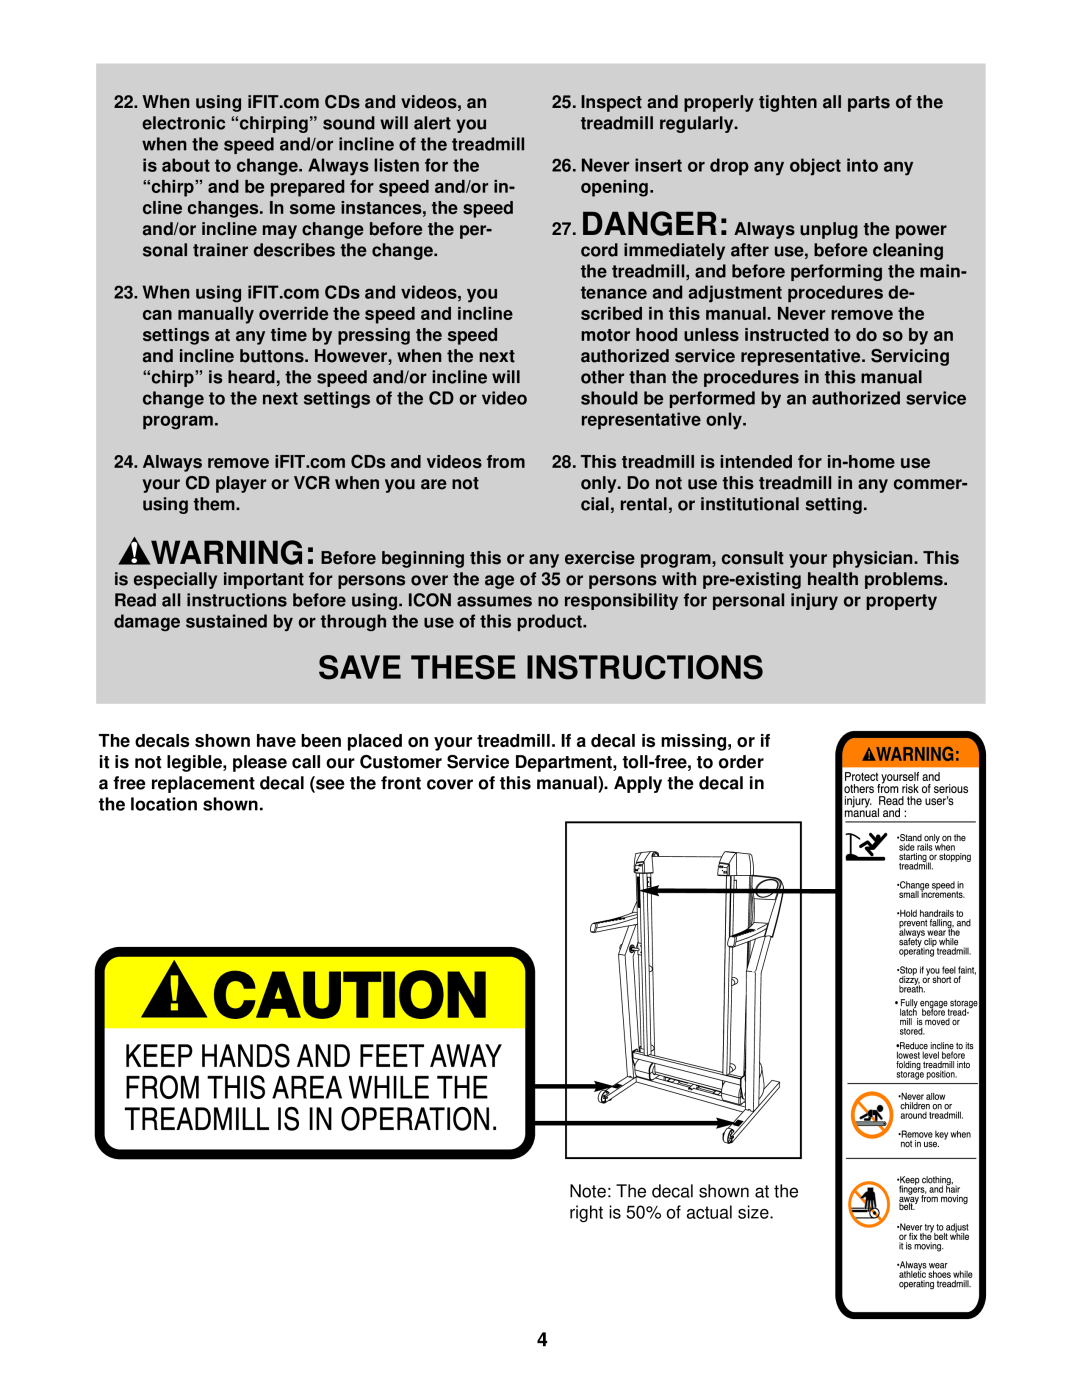 ProForm PFTL49721 user manual Save These Instructions, Inspect and properly tighten all parts of the treadmill regularly 